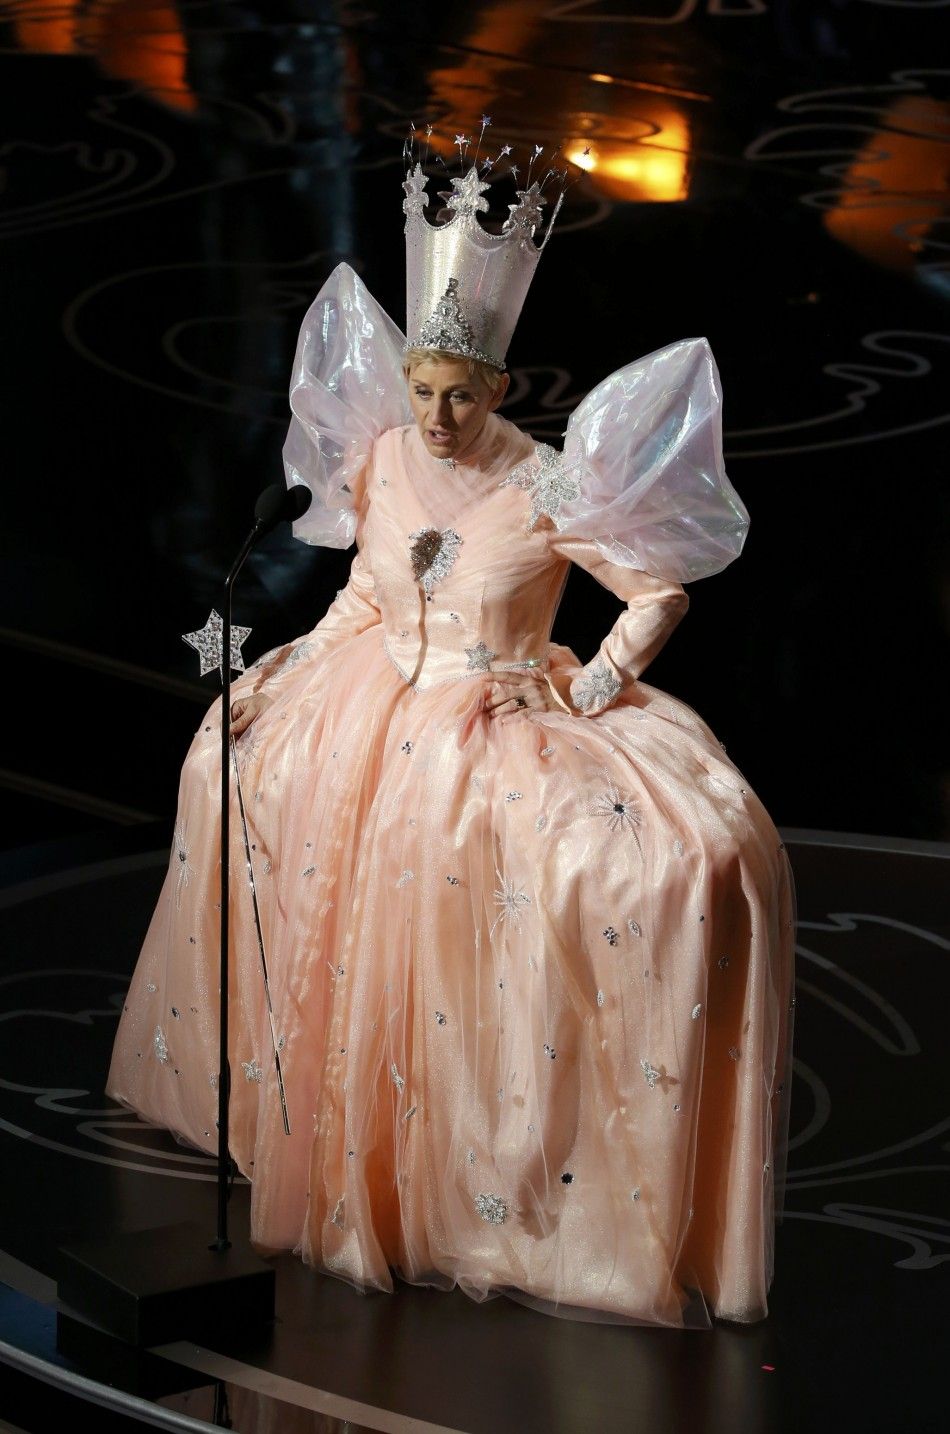 Show host Ellen DeGeneres wears a fairy costume while on stage at the 86th Academy Awards in Hollywood